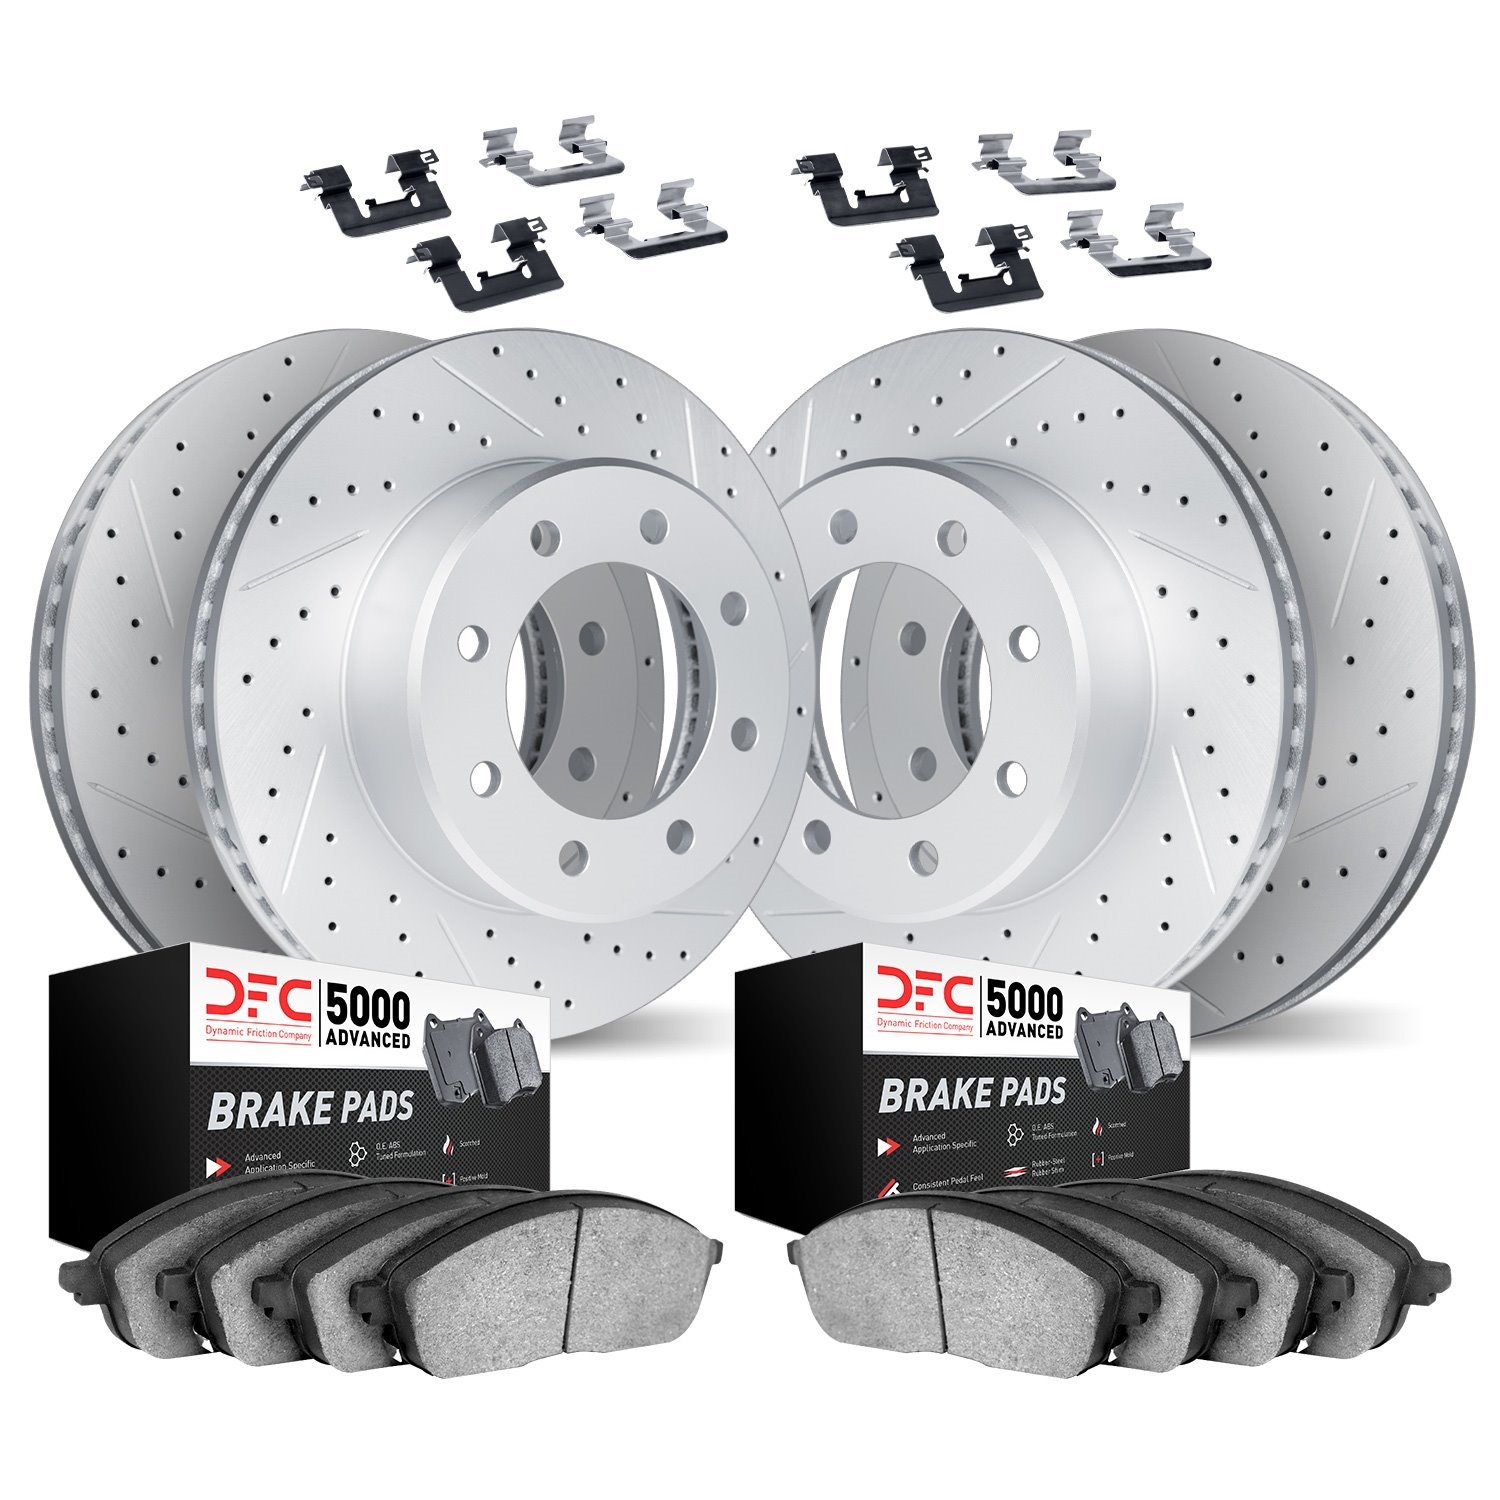 2514-54260 Geoperformance Drilled/Slotted Rotors w/5000 Advanced Brake Pads Kit & Hardware, Fits Select Ford/Lincoln/Mercury/Maz